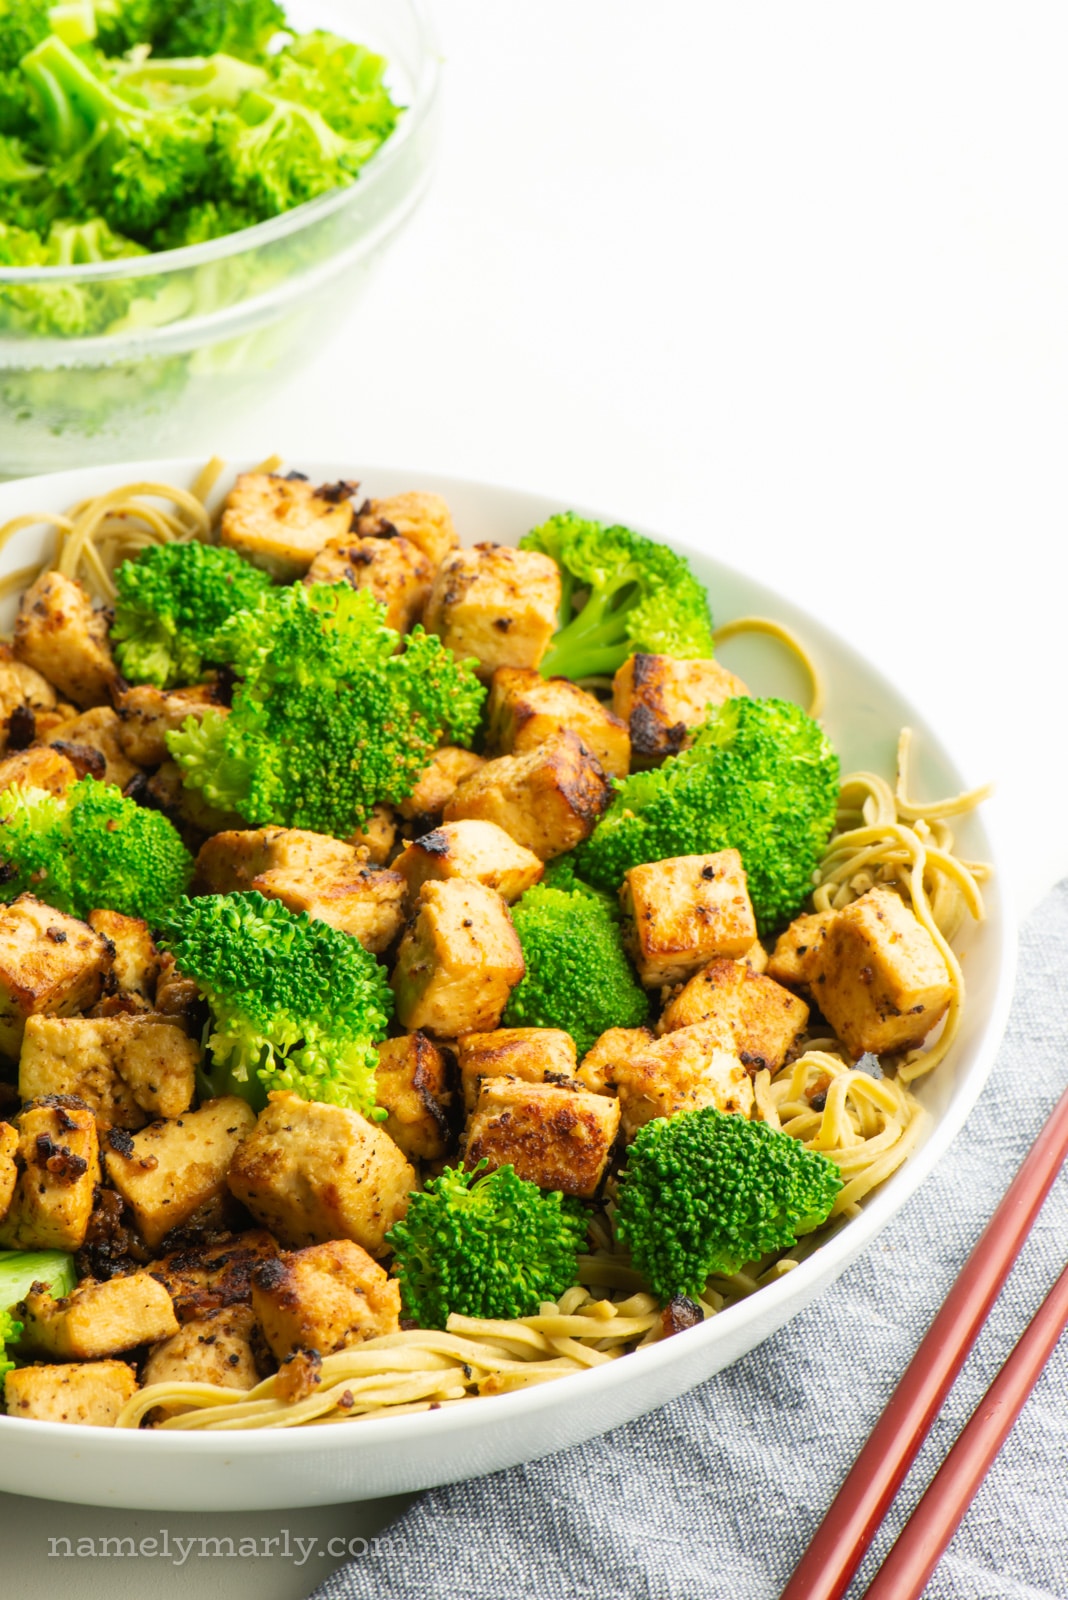 A rice bowl of miso tofu with steamed broccoli.